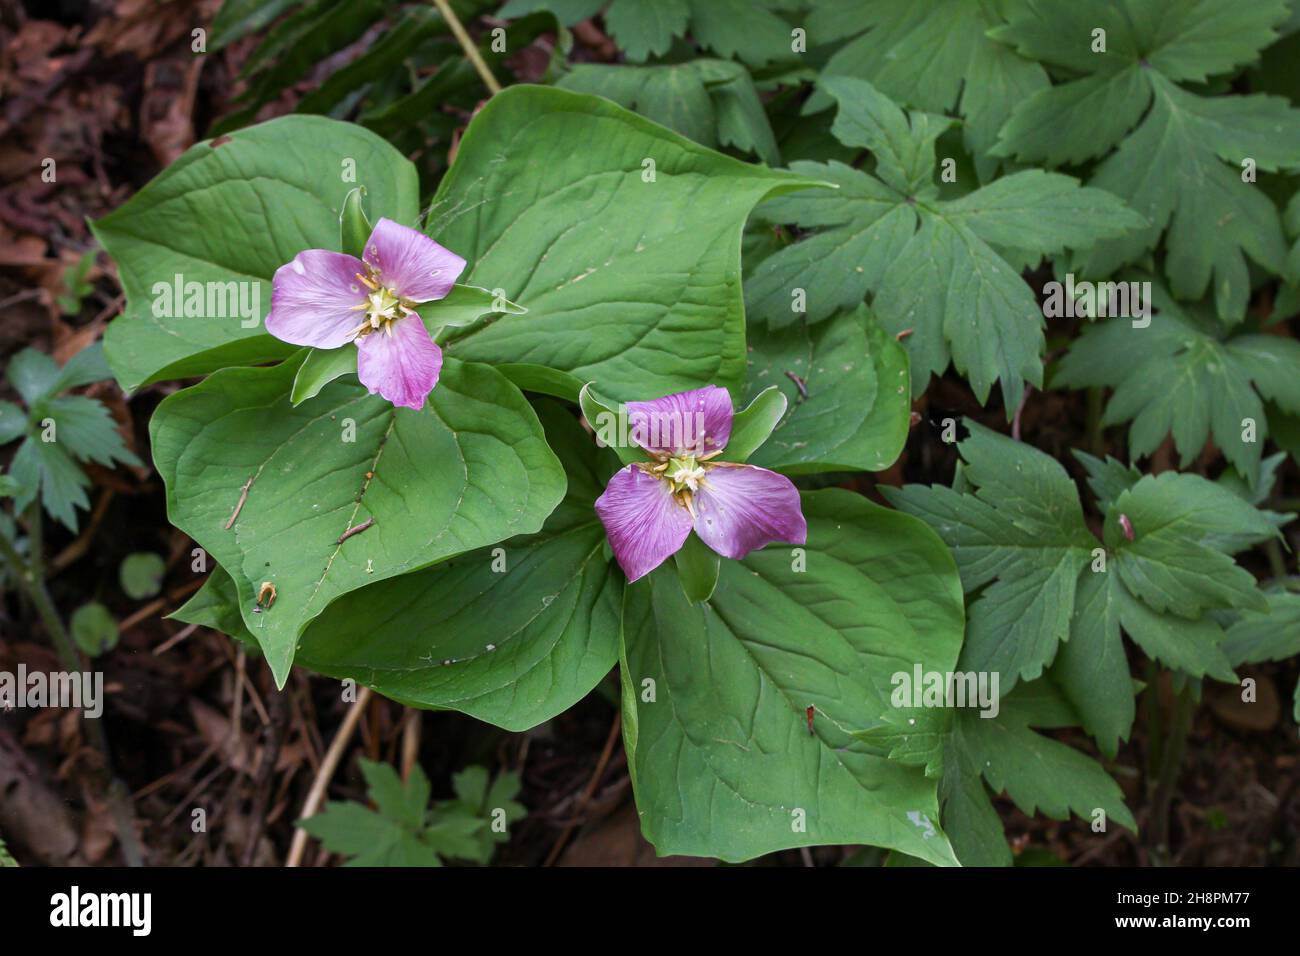 Closeup of trillium flower surrounded by leaves Stock Photo